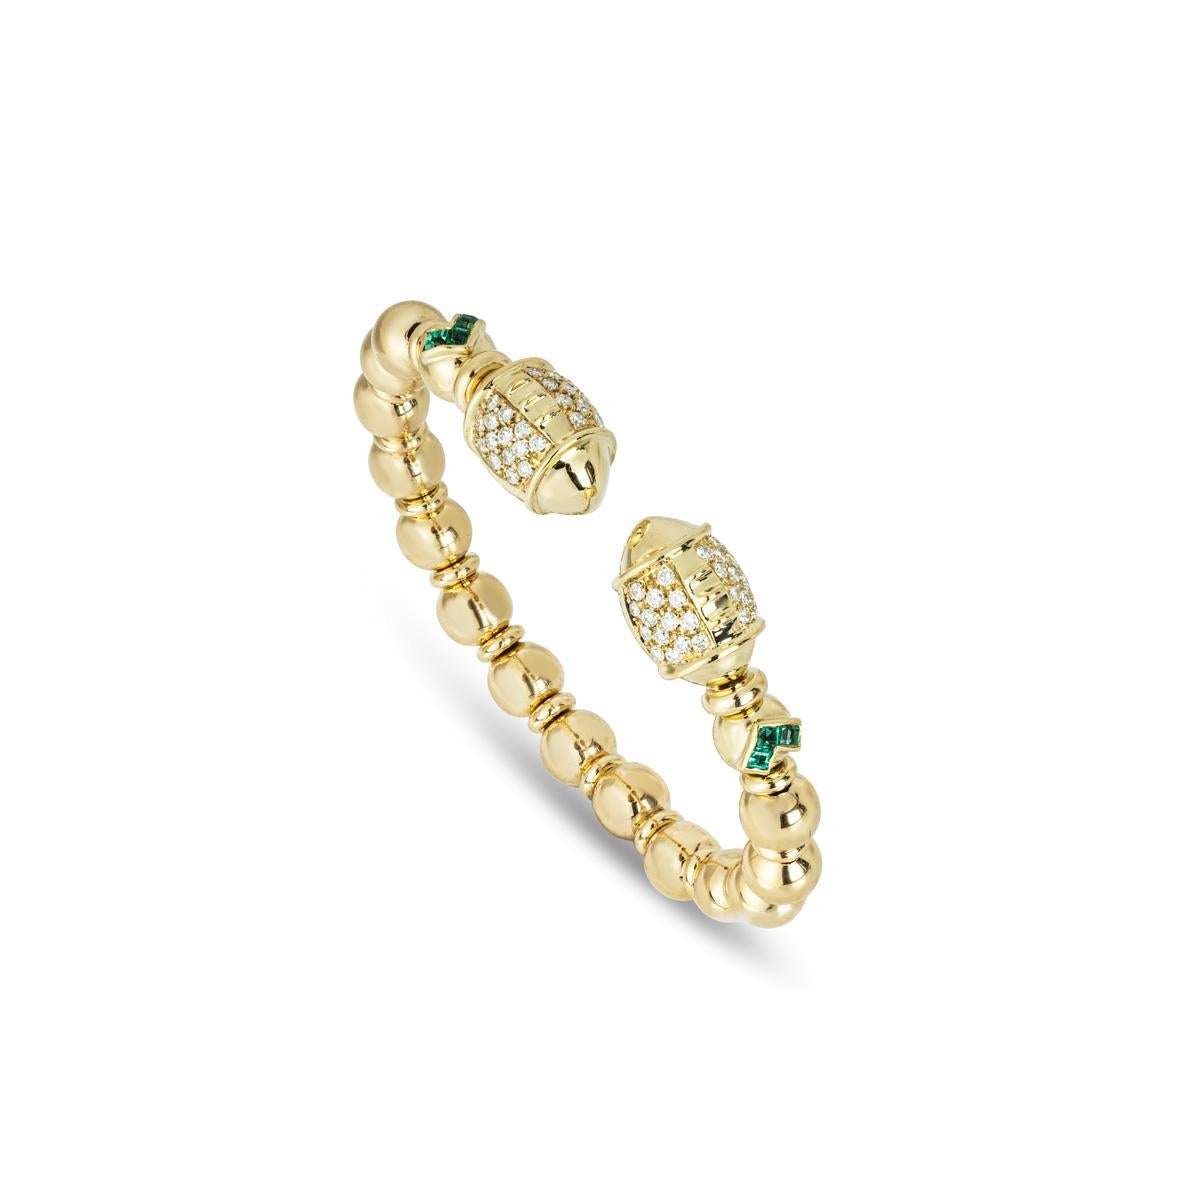 A striking 18k yellow gold diamond and emerald cuff bangle. The bracelet features two emerald stations channel set with 6 square cut emeralds with an approximate total weight of 0.30ct and displaying a vibrant green hue. Further complementing the